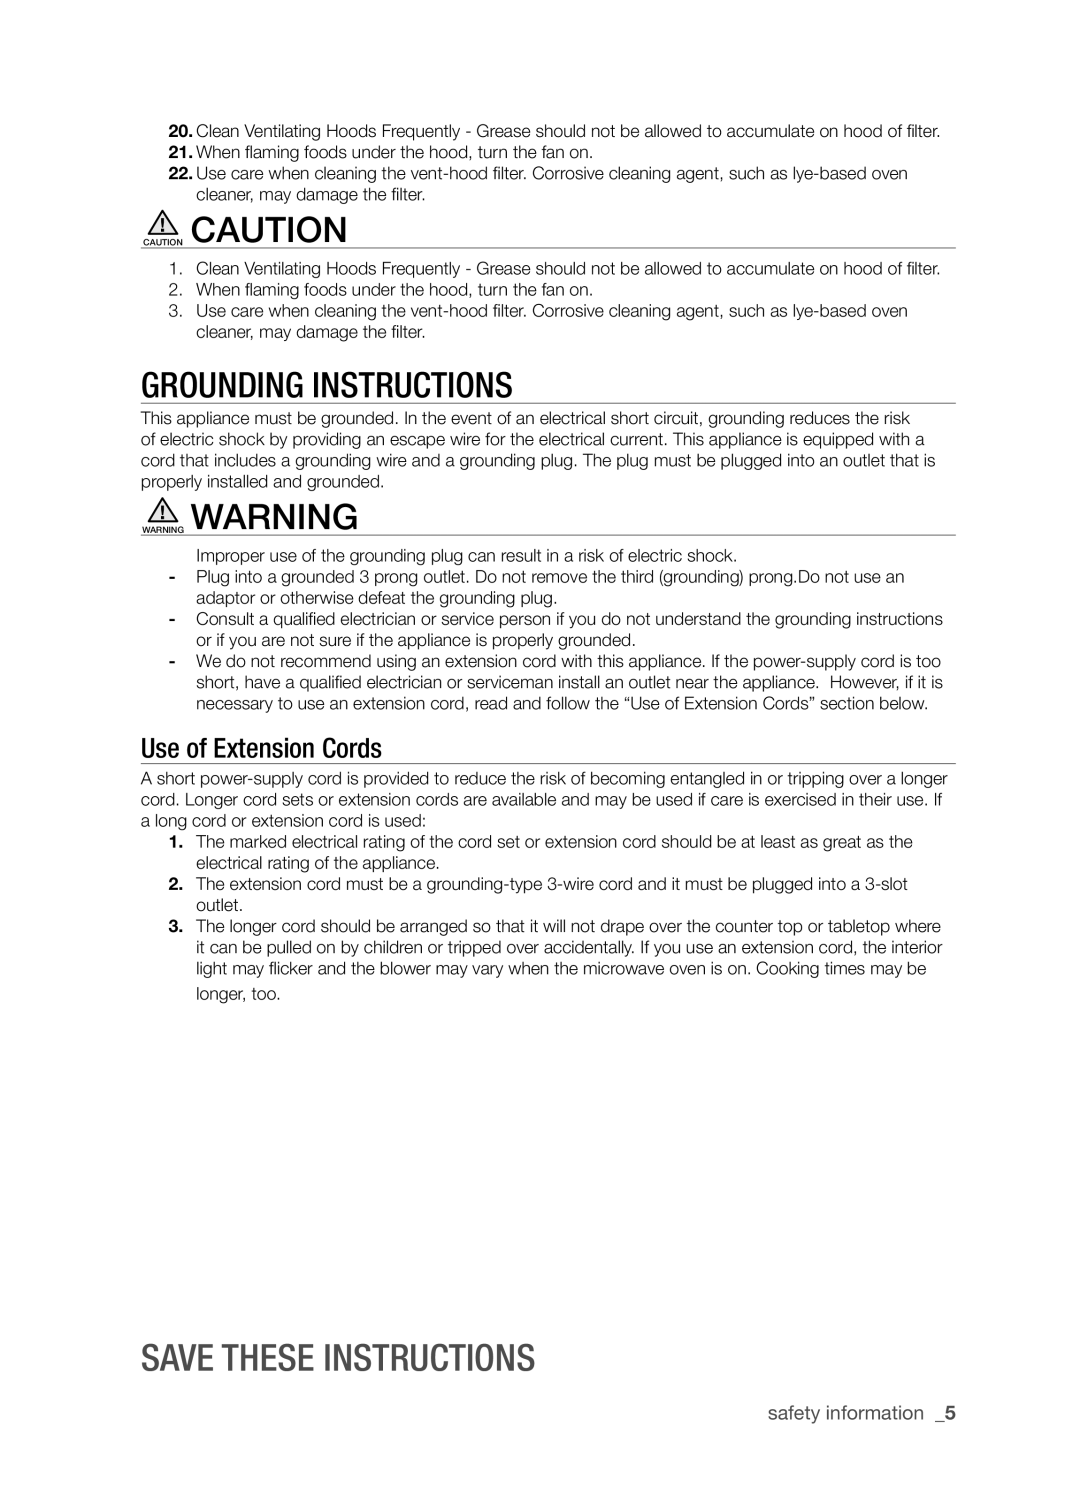 Samsung SMH9207 user manual Grounding Instructions, Save these instructions, Use of Extension Cords, safety information 